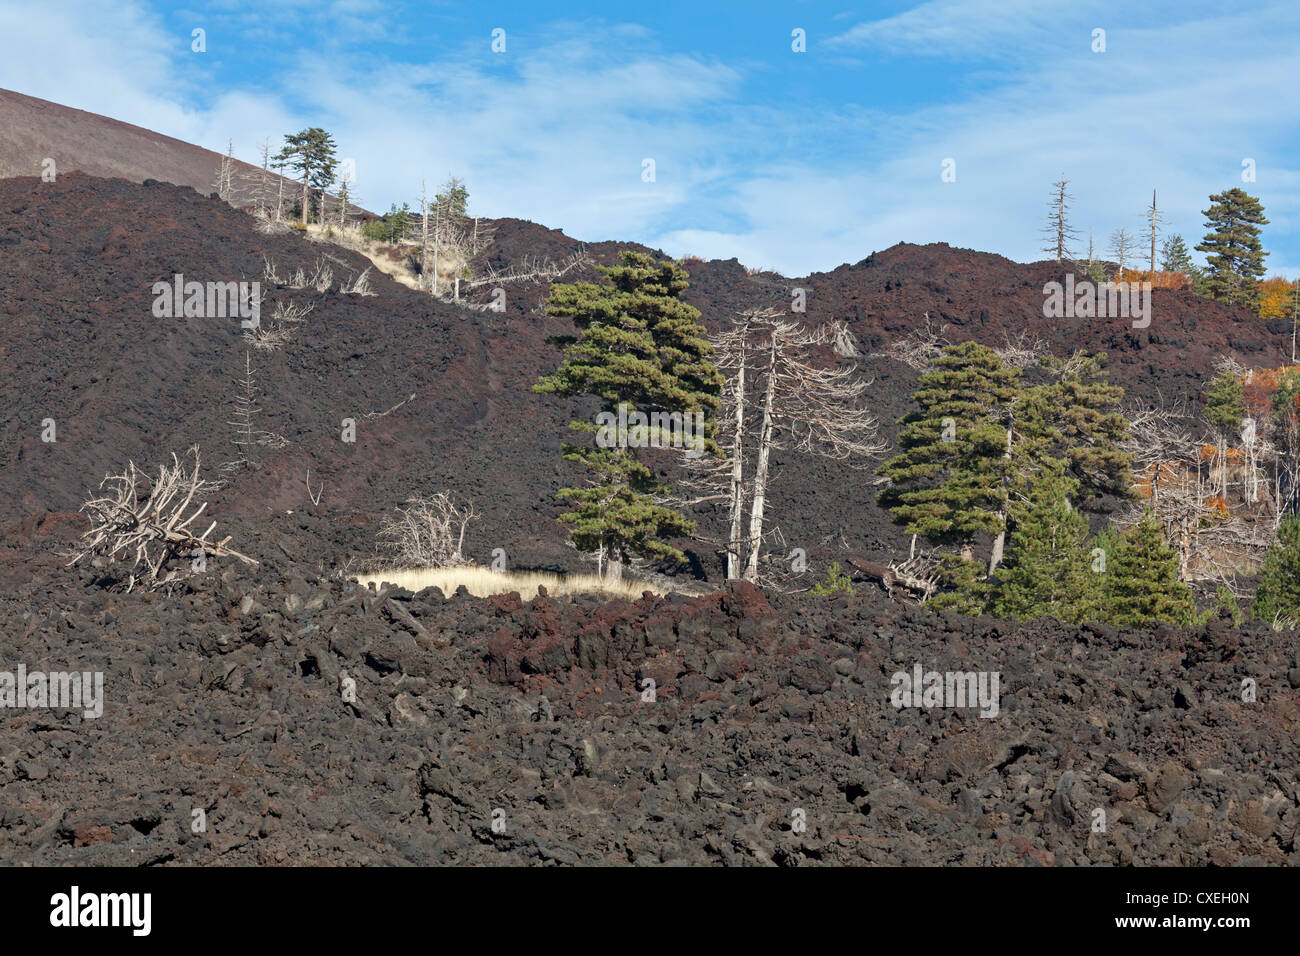 Lava flow Mount Etna with dead trees, Sicily, Italy Stock Photo